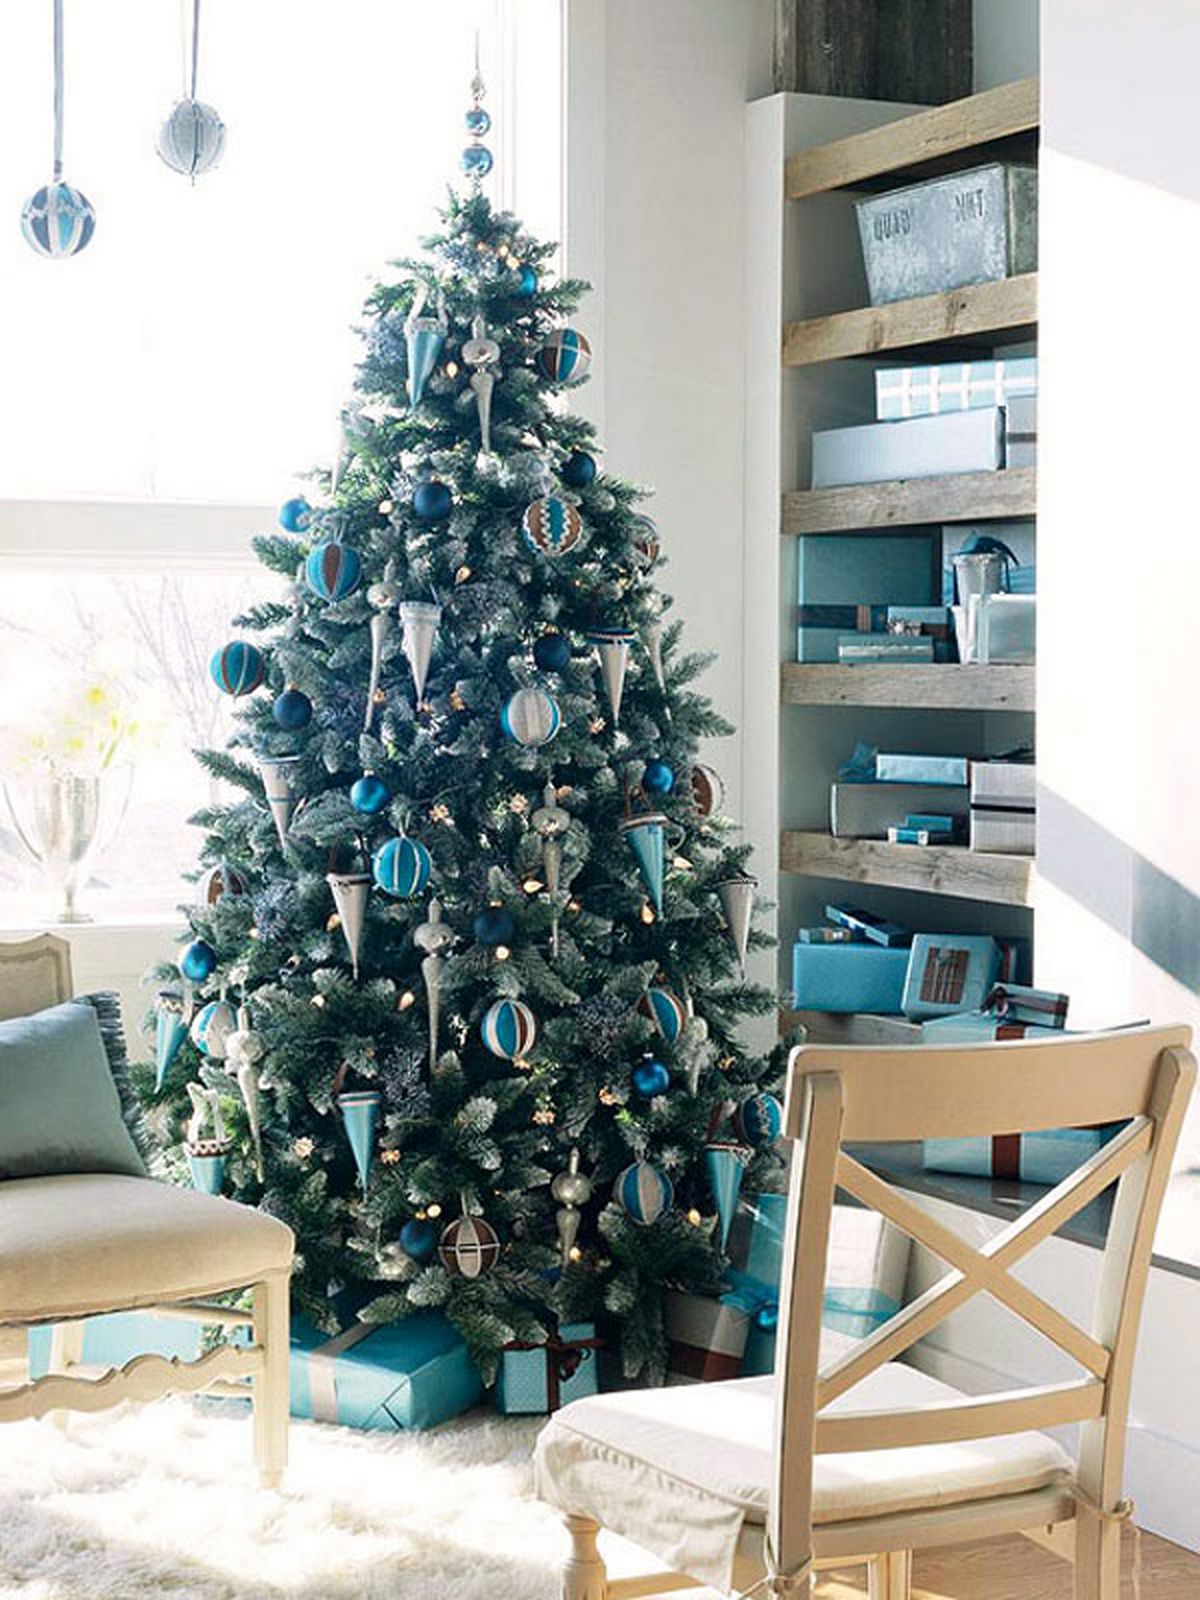 other-design-inspiring-christmas-tree-on-minimalist-living-room-with-bookcase-also-wooden-chair-also-pendant-lamp-inspiring-wonderful-christmas-decorating-themes-ideas